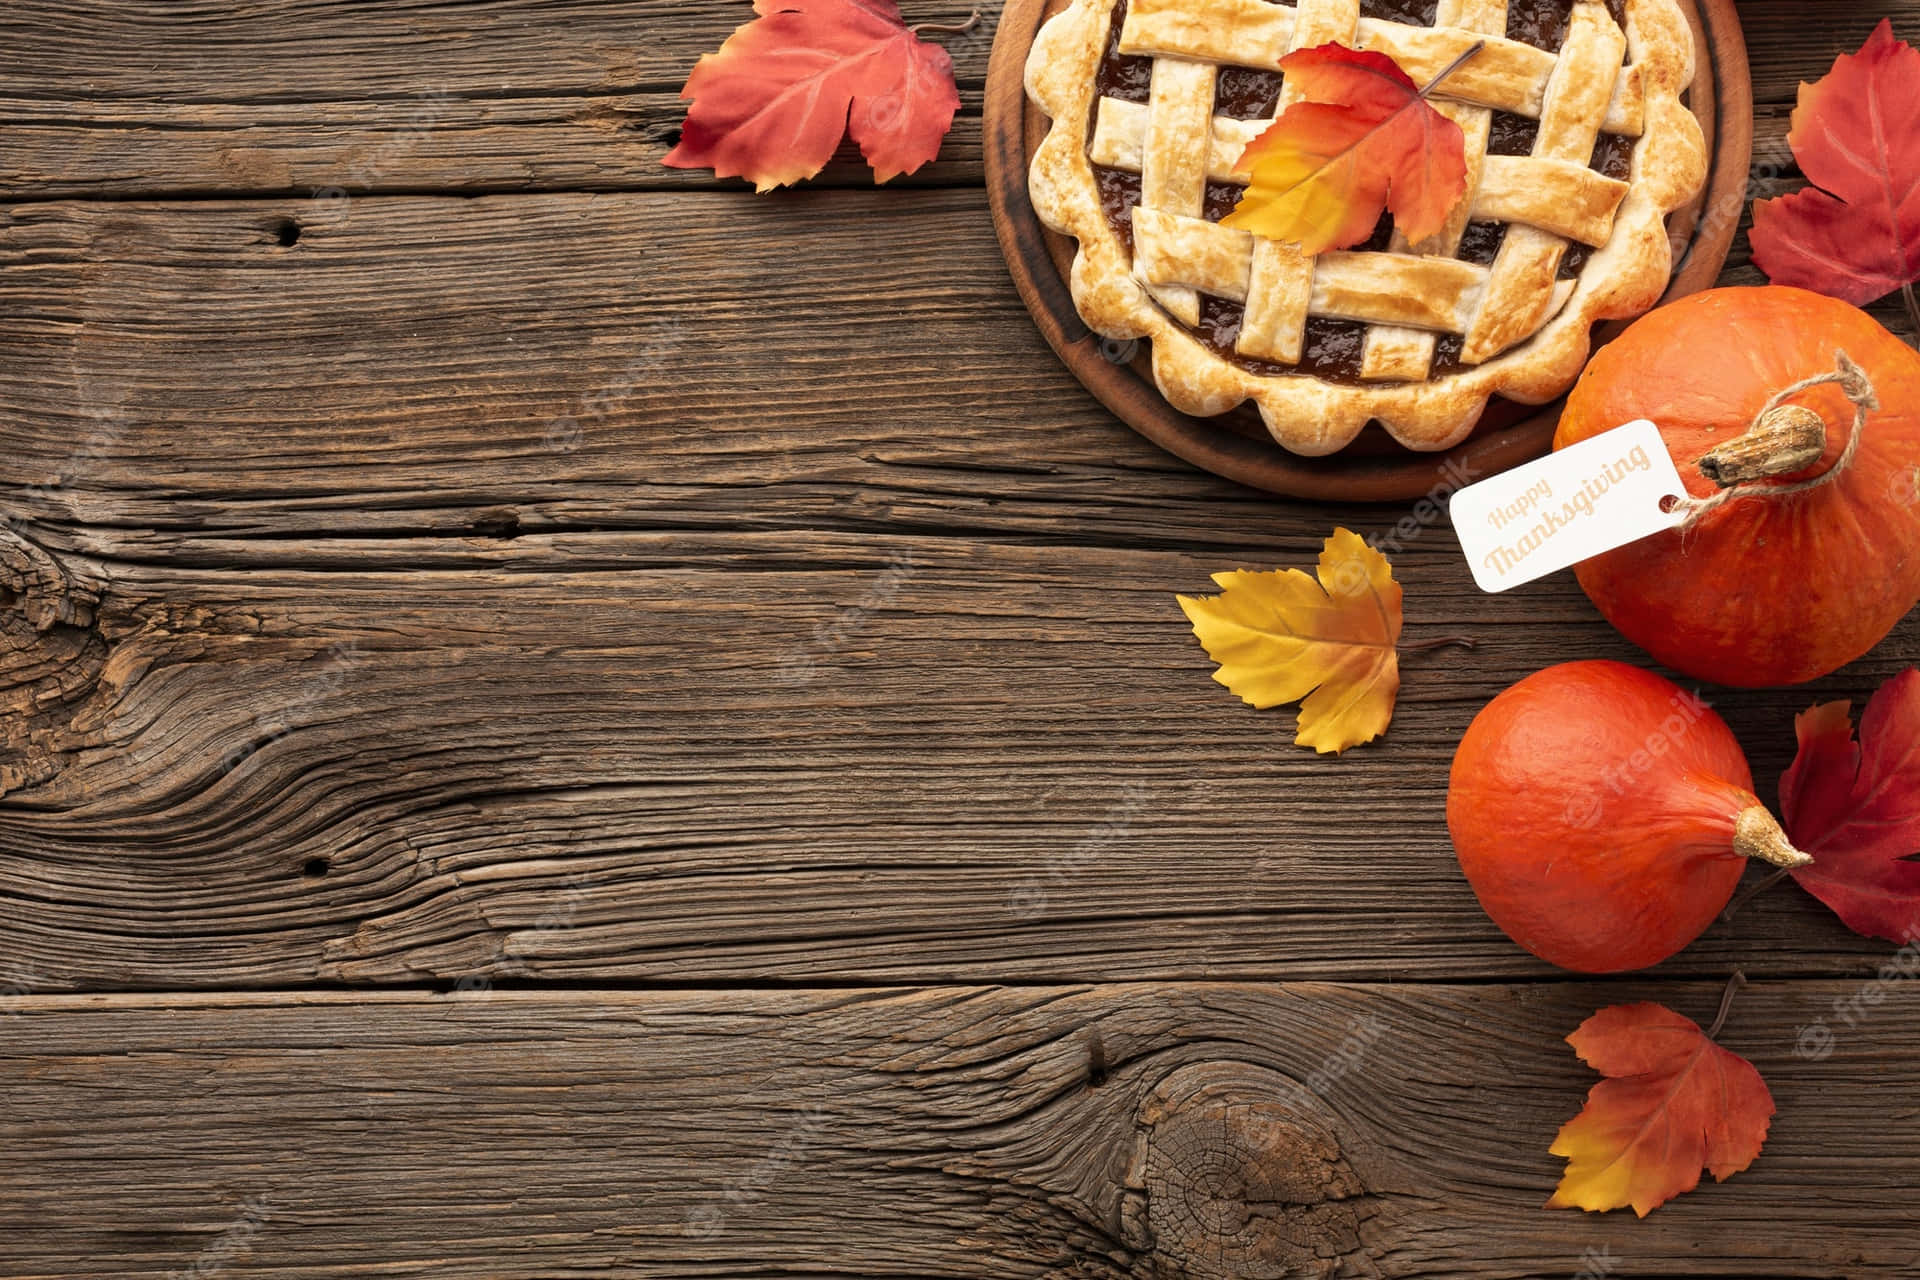 "Celebrate Happy Thanksgiving with this beautiful Desktop wallpaper!" Wallpaper